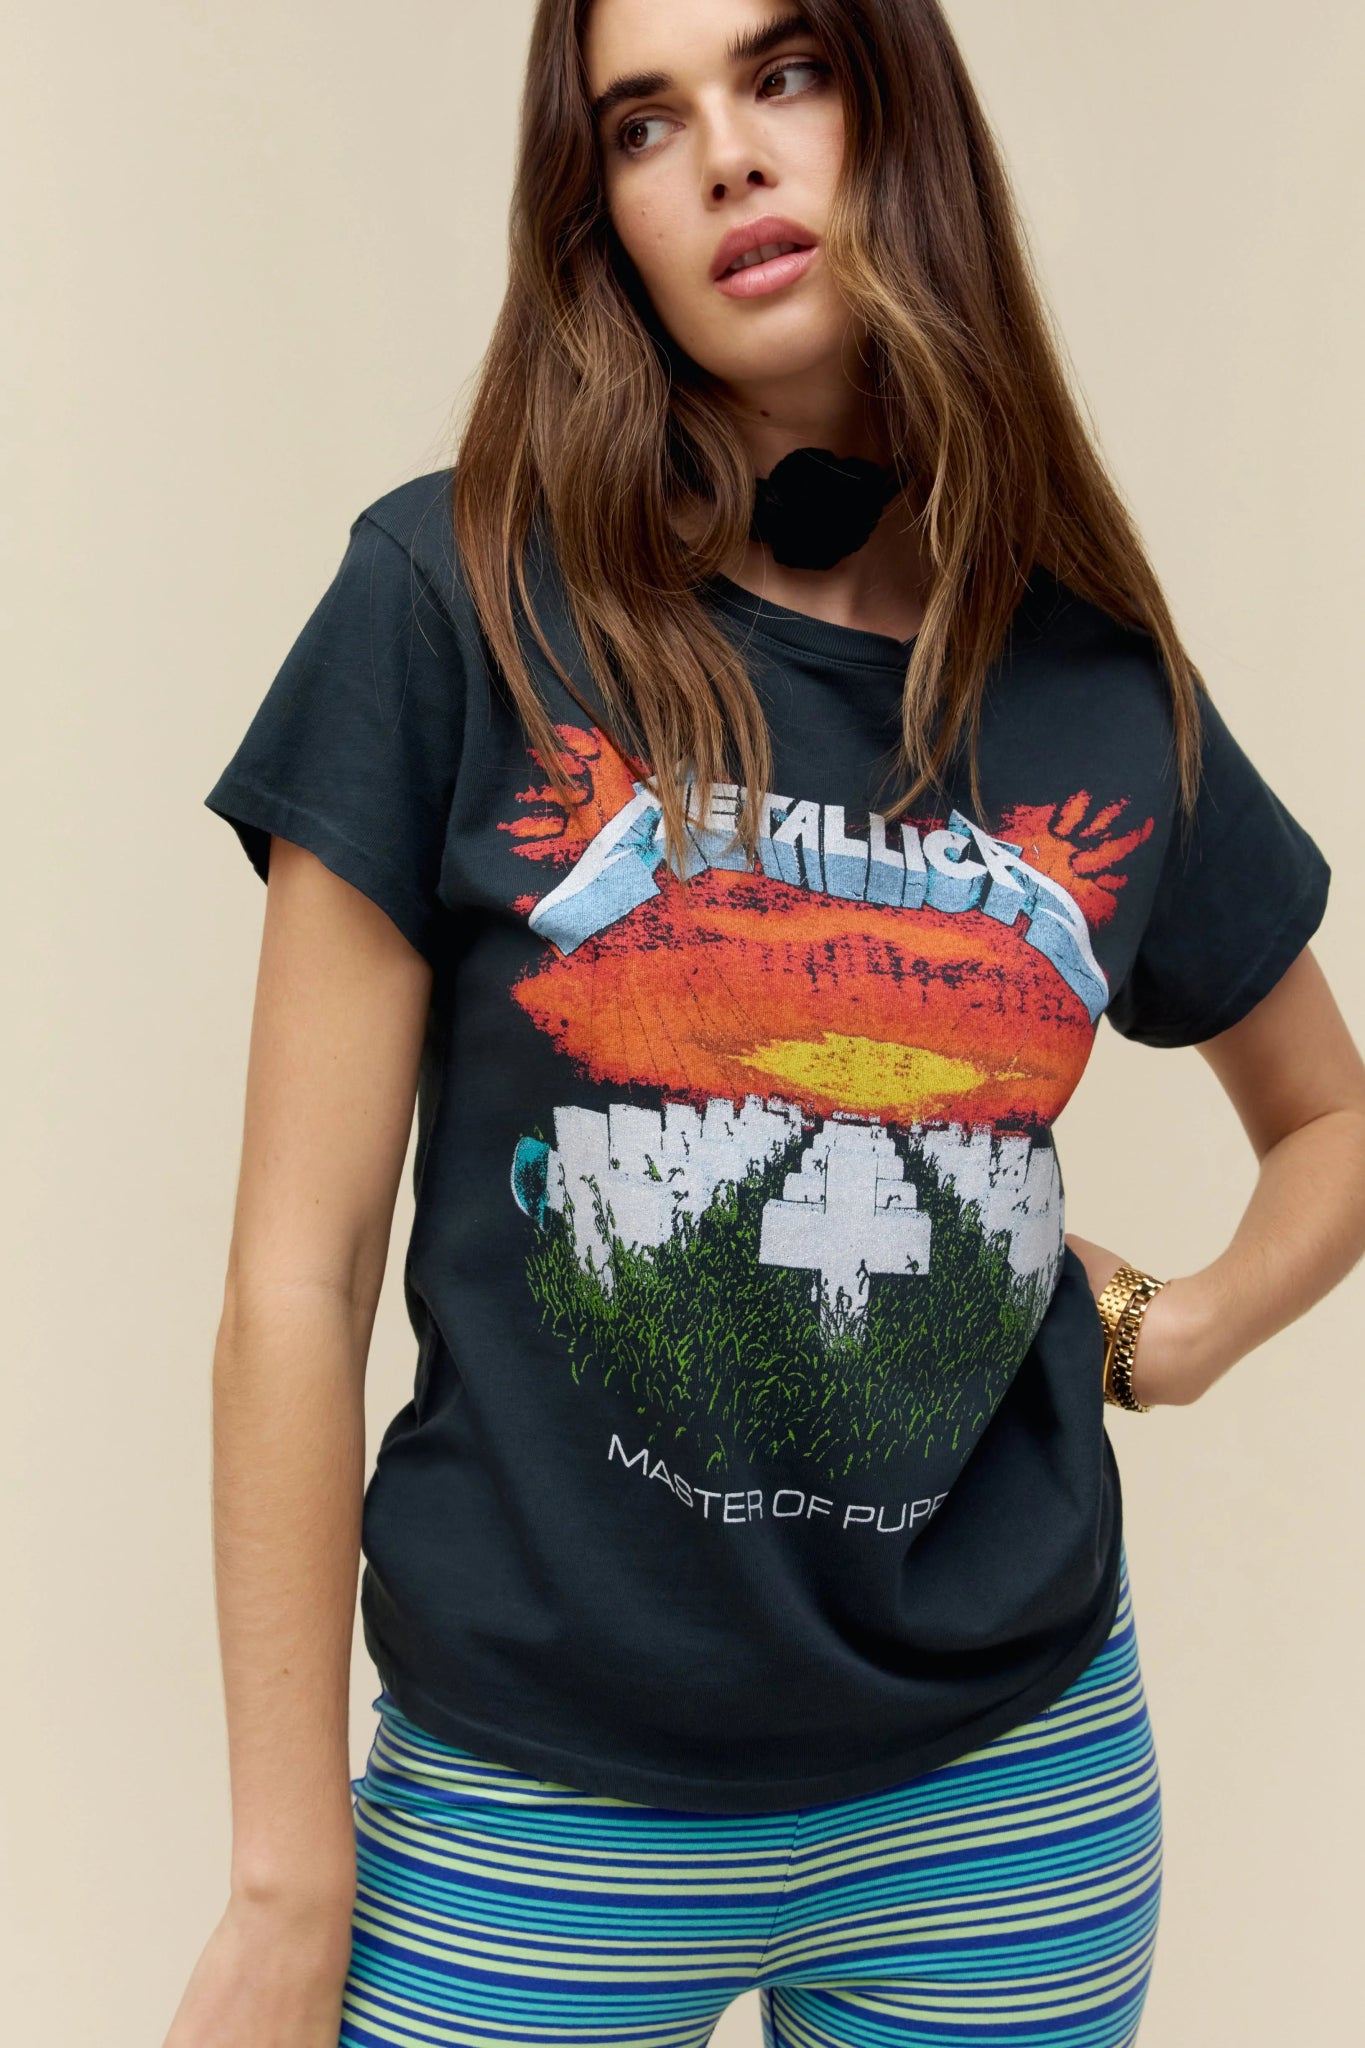 Daydreamer Graphic Tees | Metallica Master Of Puppets | Tour T-Shirt - Women's Shirts & Tops - Blooming Daily